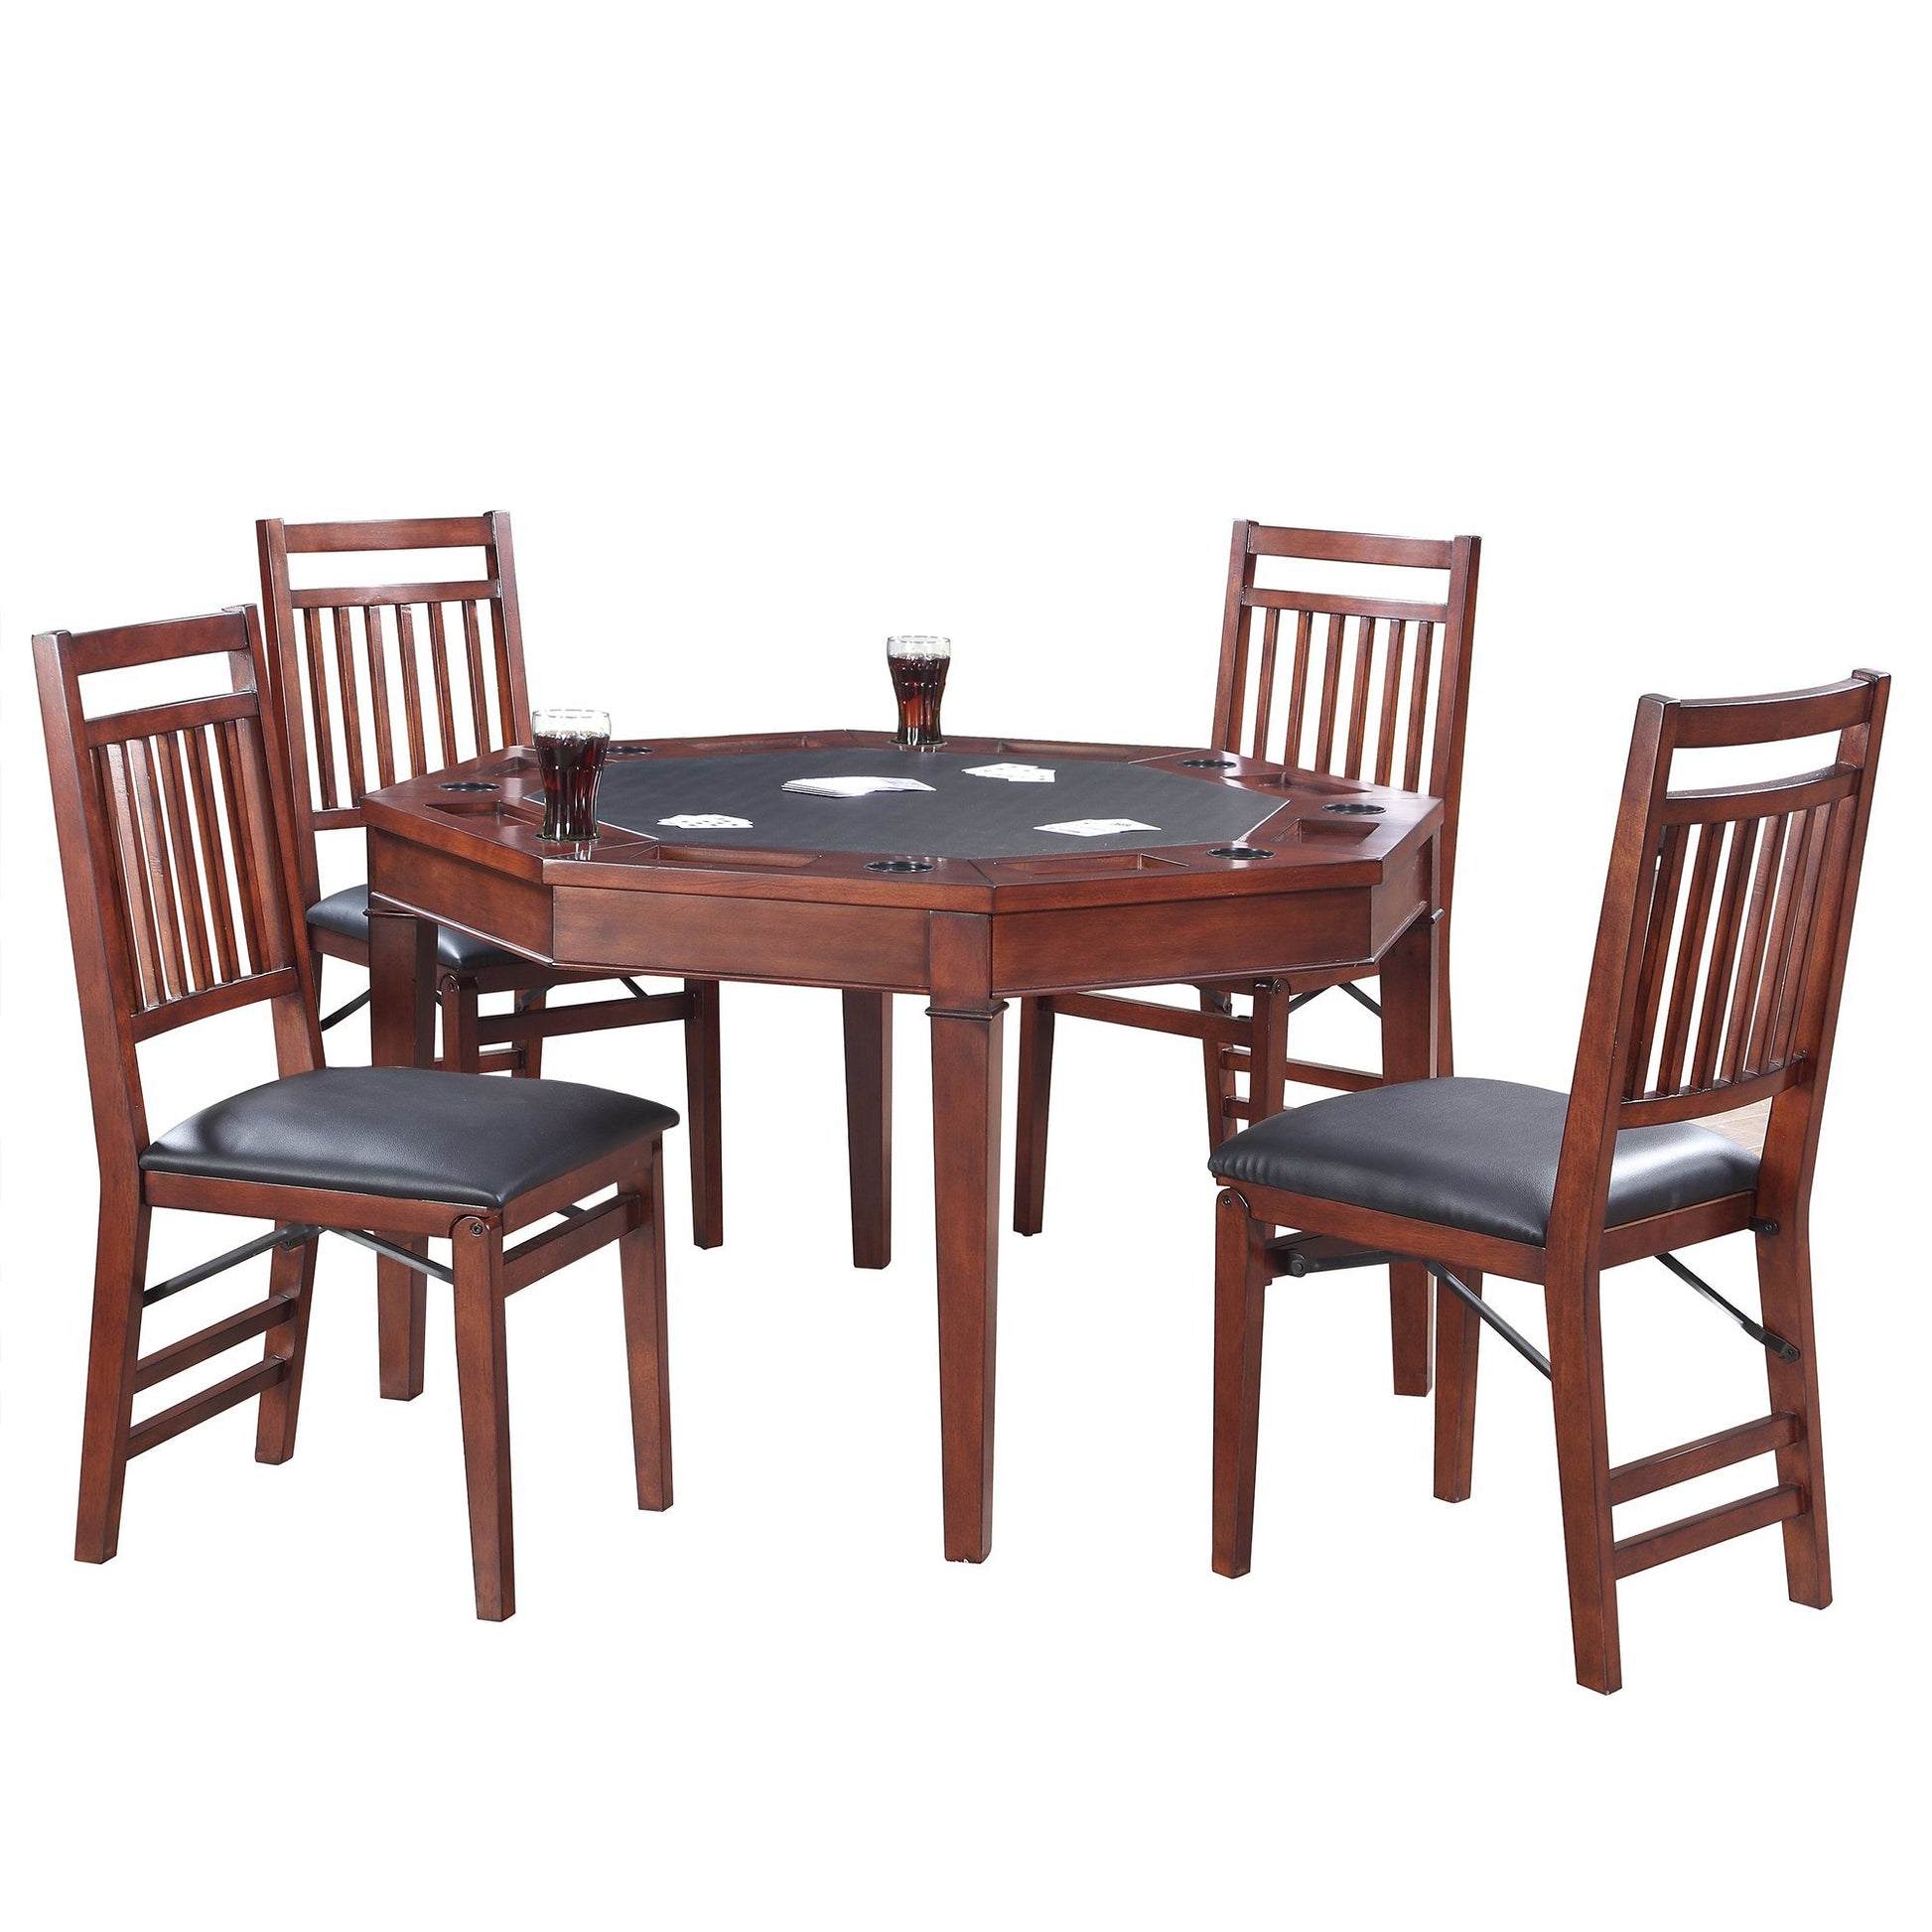 Hathaway Broadway 48" Octagon Folding Poker Table Set with 4 Chairs - Just Poker Tables